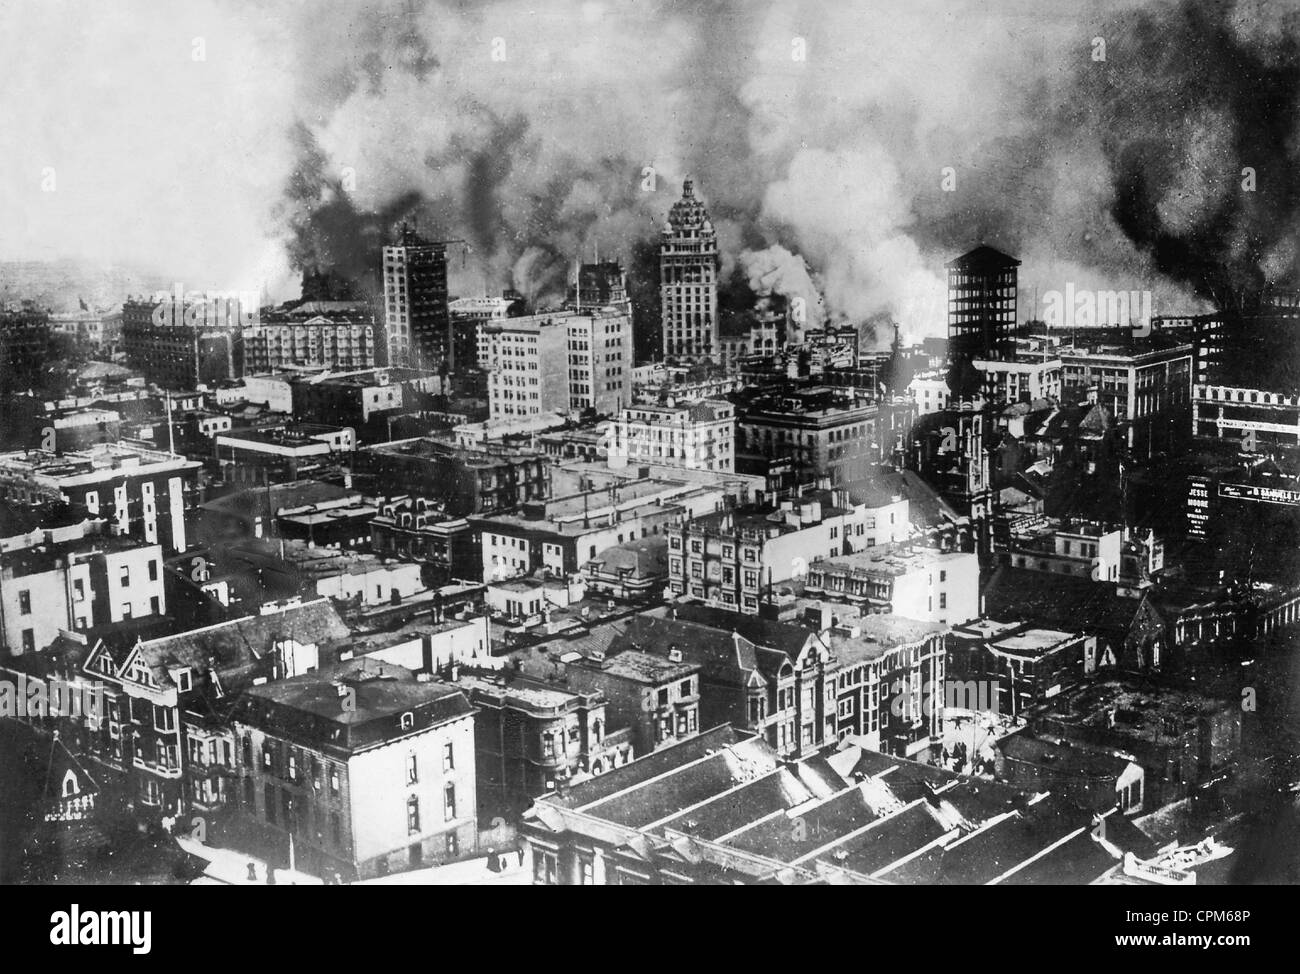 San Francisco Earthquake 1906 High Resolution Stock Photography and Images - Alamy